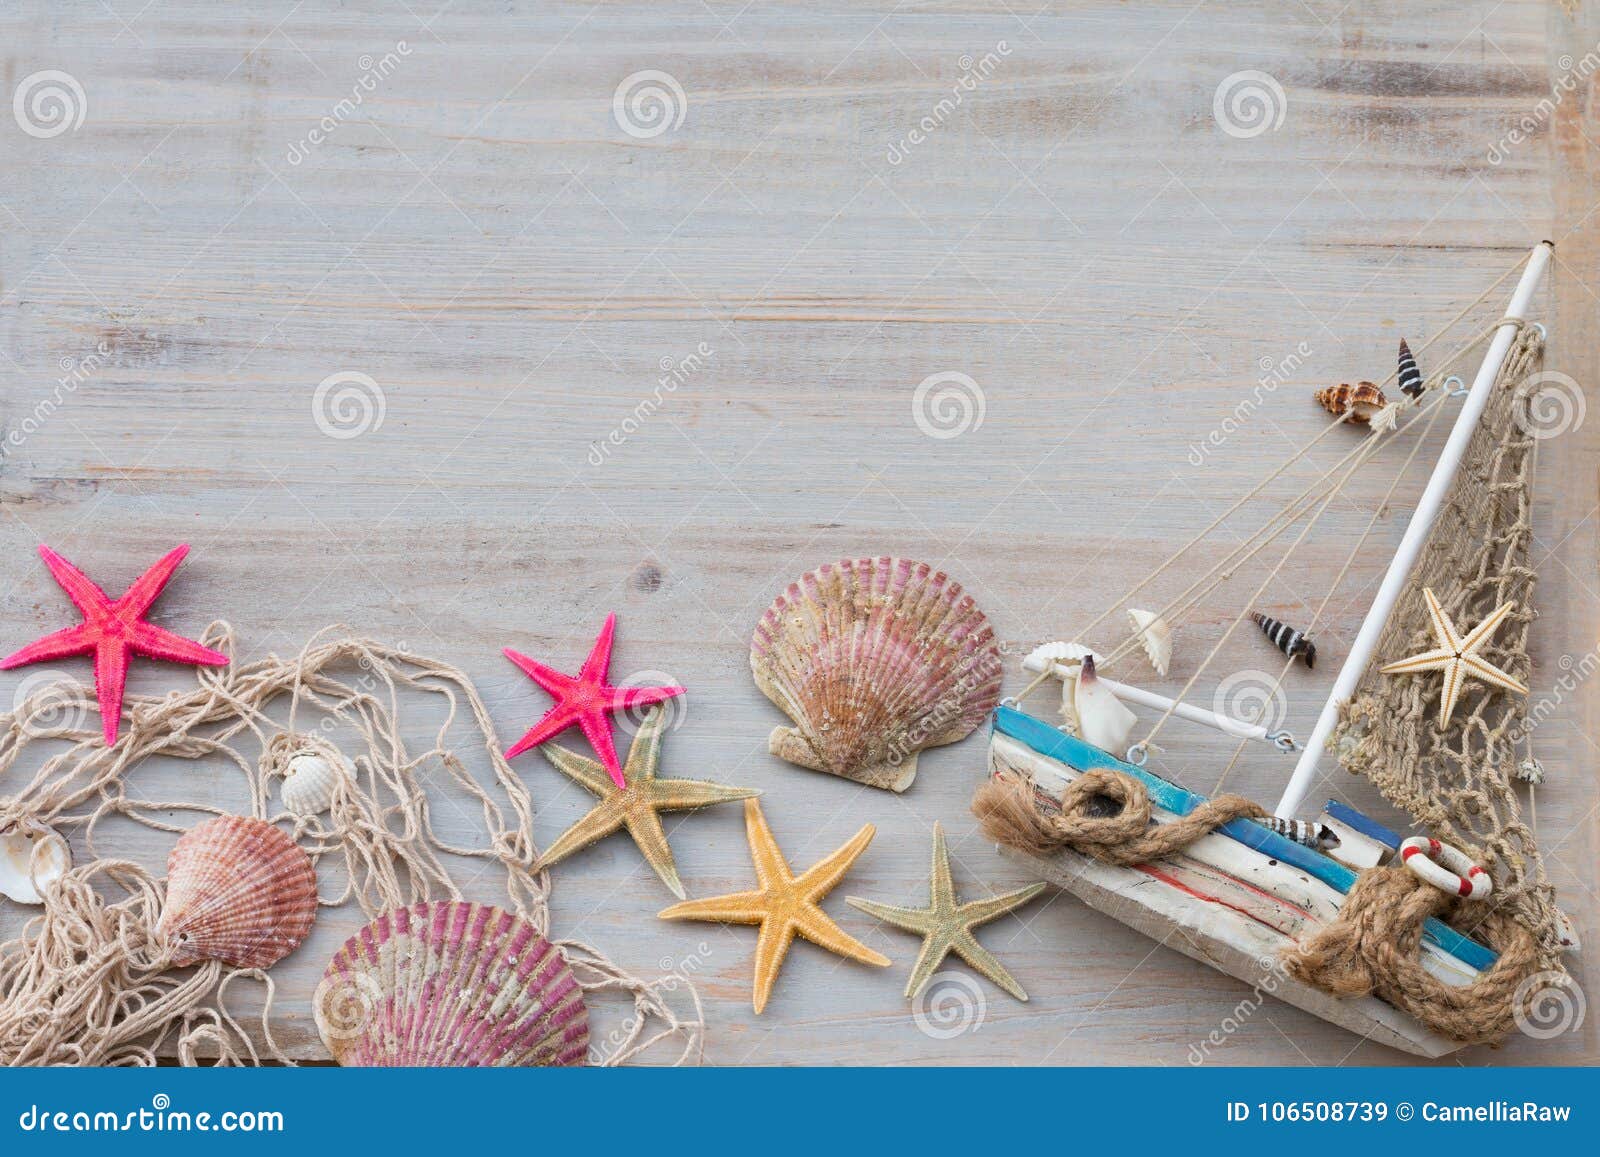 133 Miniature Fishing Boat Beach Stock Photos - Free & Royalty-Free Stock  Photos from Dreamstime